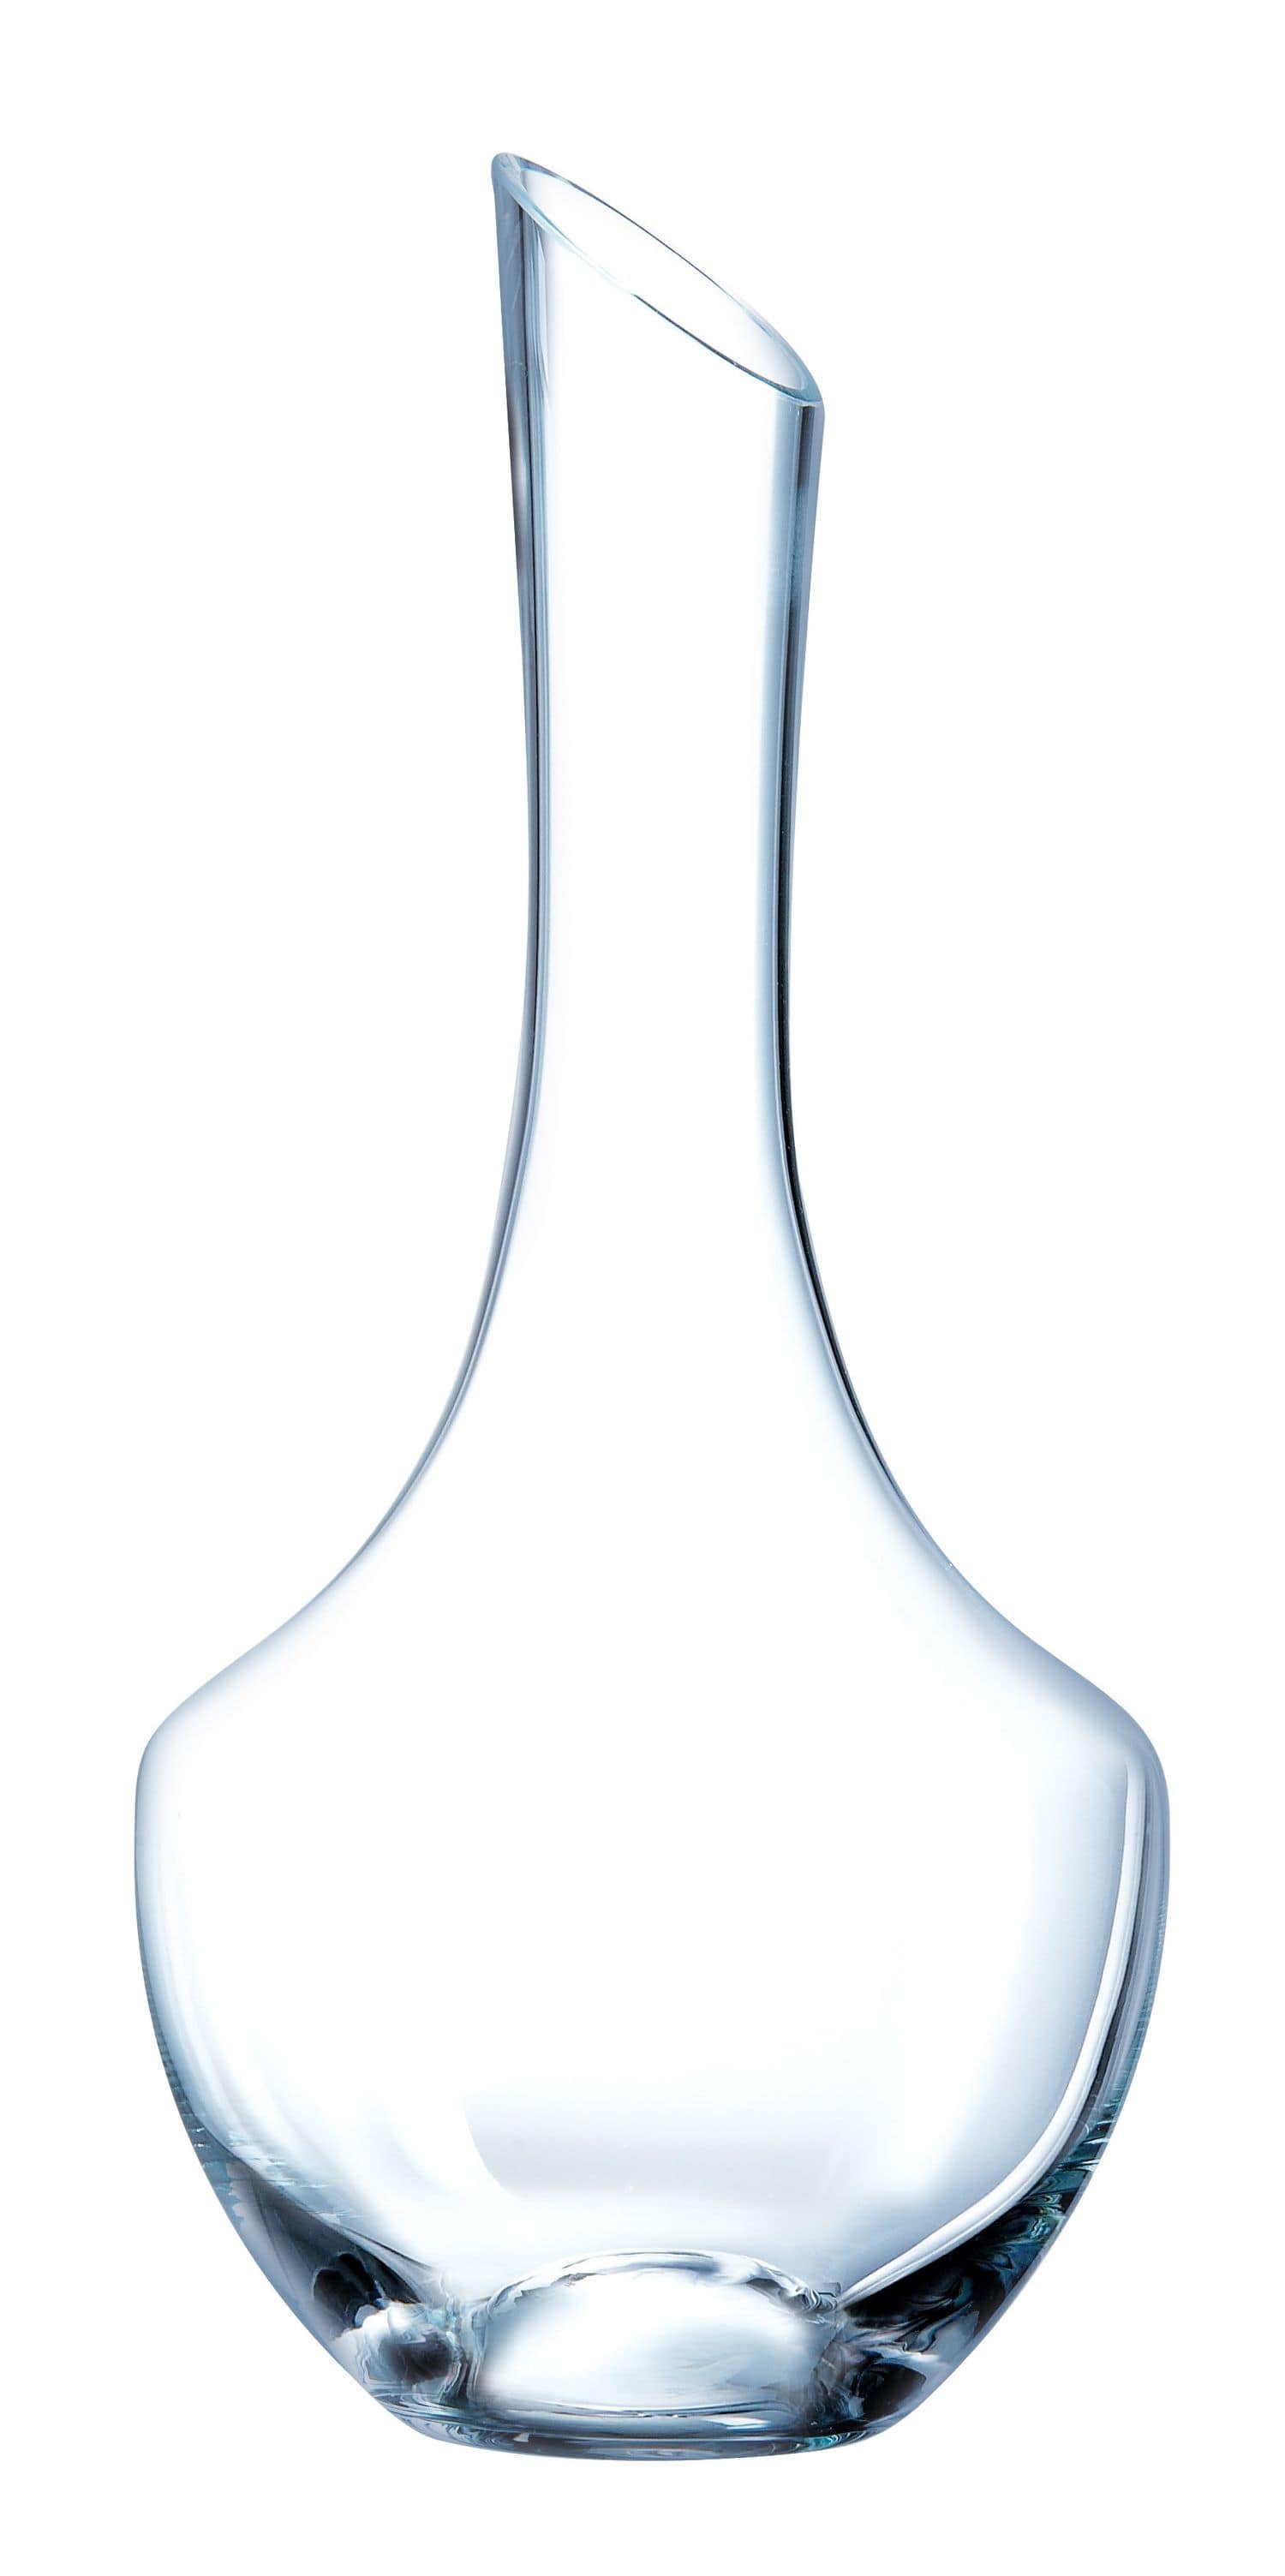 Open Up Wine Decanter 1.4L